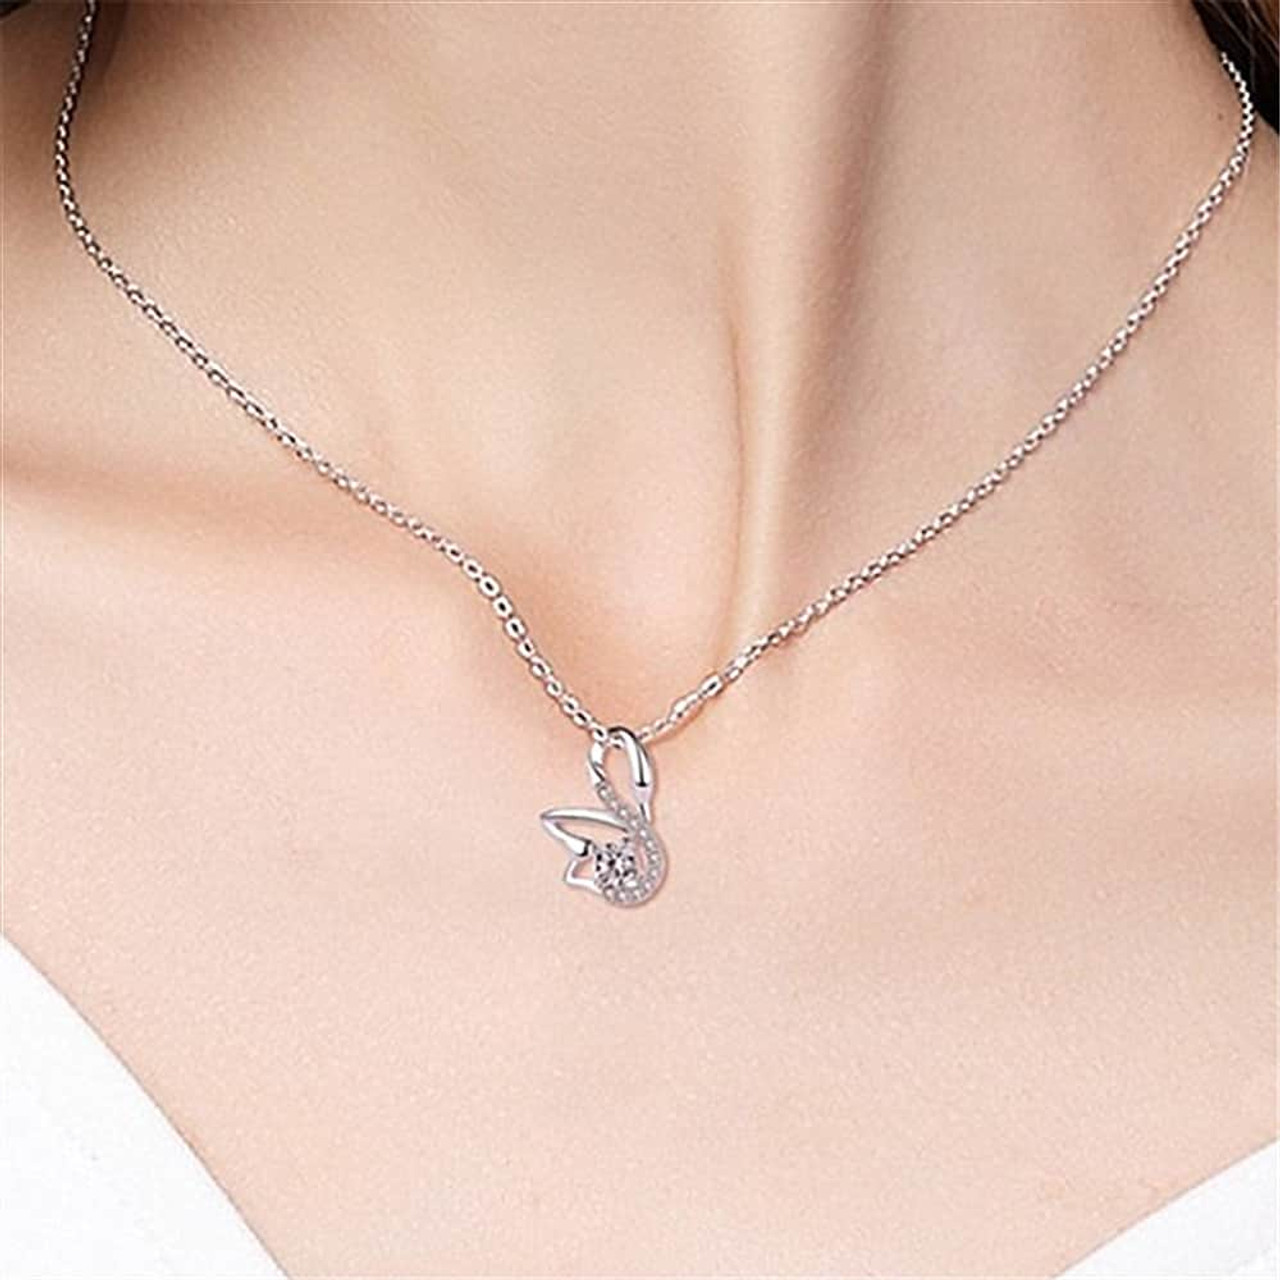 Swan Necklace Silver Plated Clavicle Chain Pendant